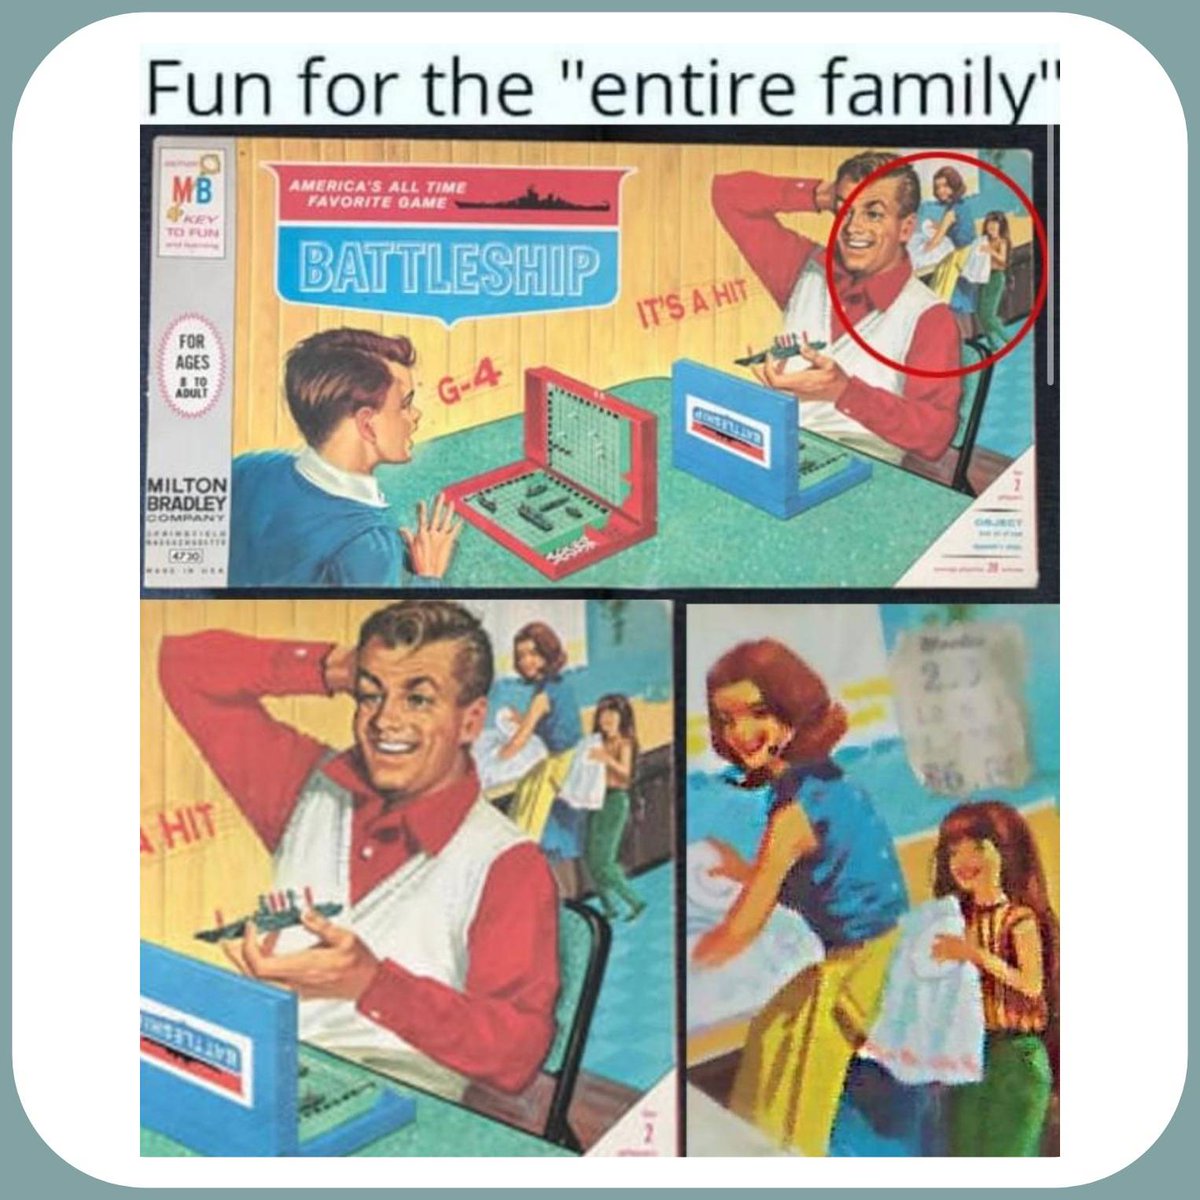 Uh huh the 'entire family' indeed.